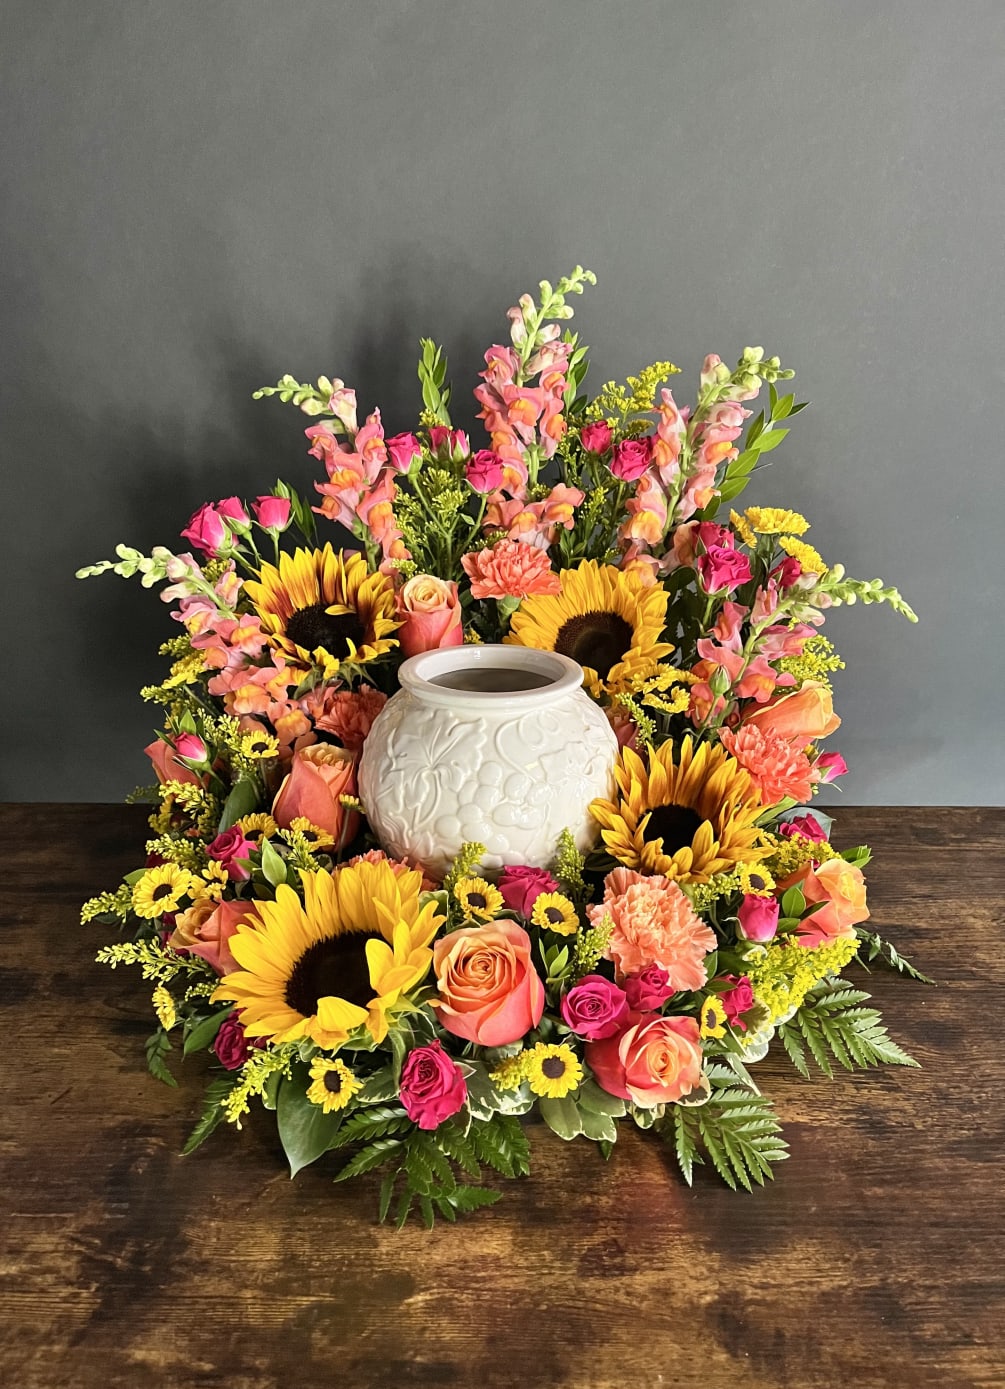 A beautiful mix of bright summer colors! Sunflowers, Viking pomps, hot pink